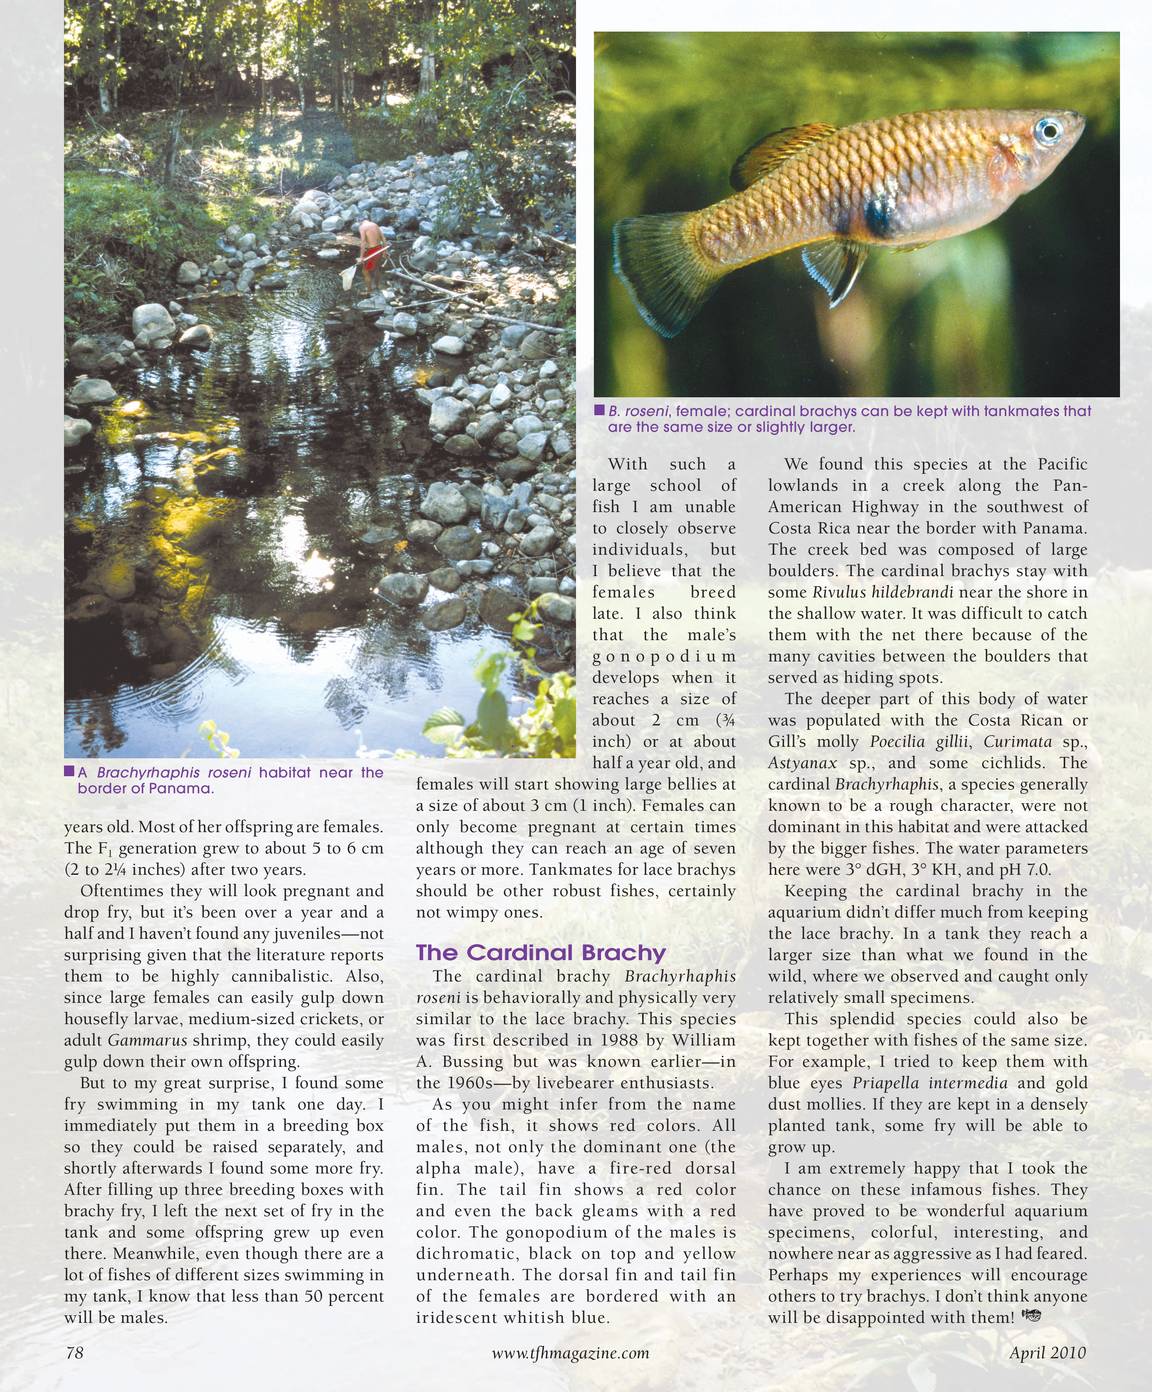 Tropical Fish Hobbyist - April 2010 - page 34